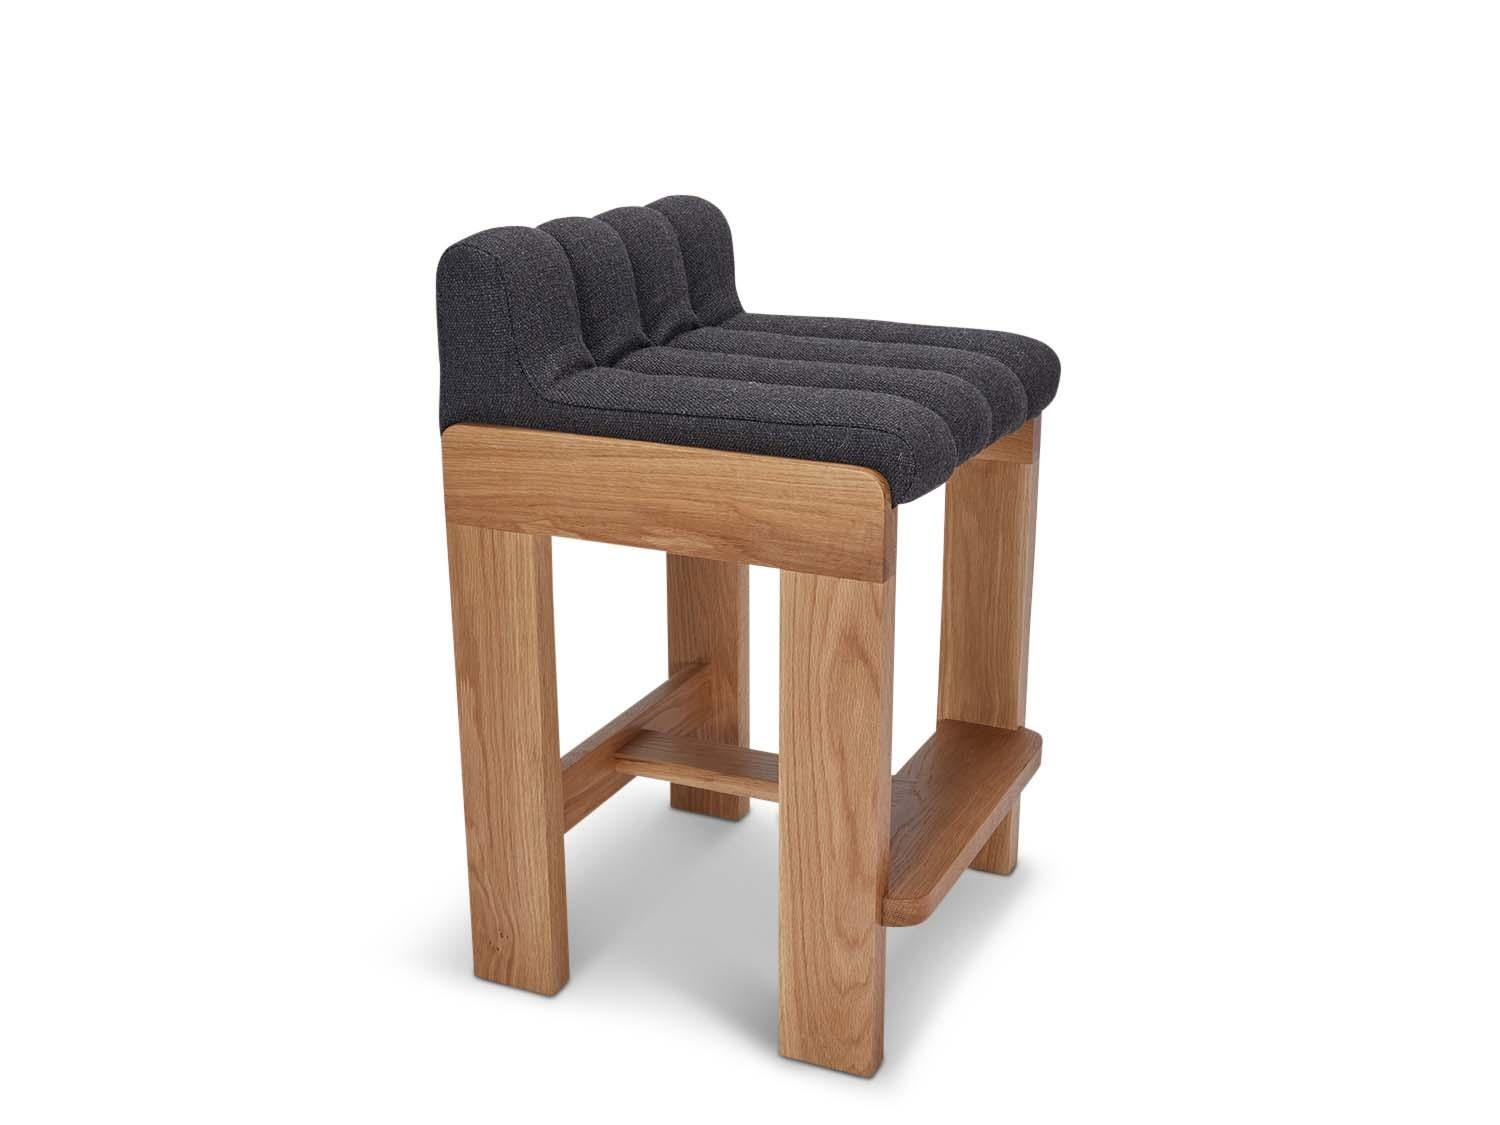 The El Cap Barstool has a sturdy, detail-rich, hardwood frame topped with a channel tufted seat that resembles an ocean swell.

The Lawson-Fenning Collection is designed and handmade in Los Angeles, California. Reach out to discover what options are